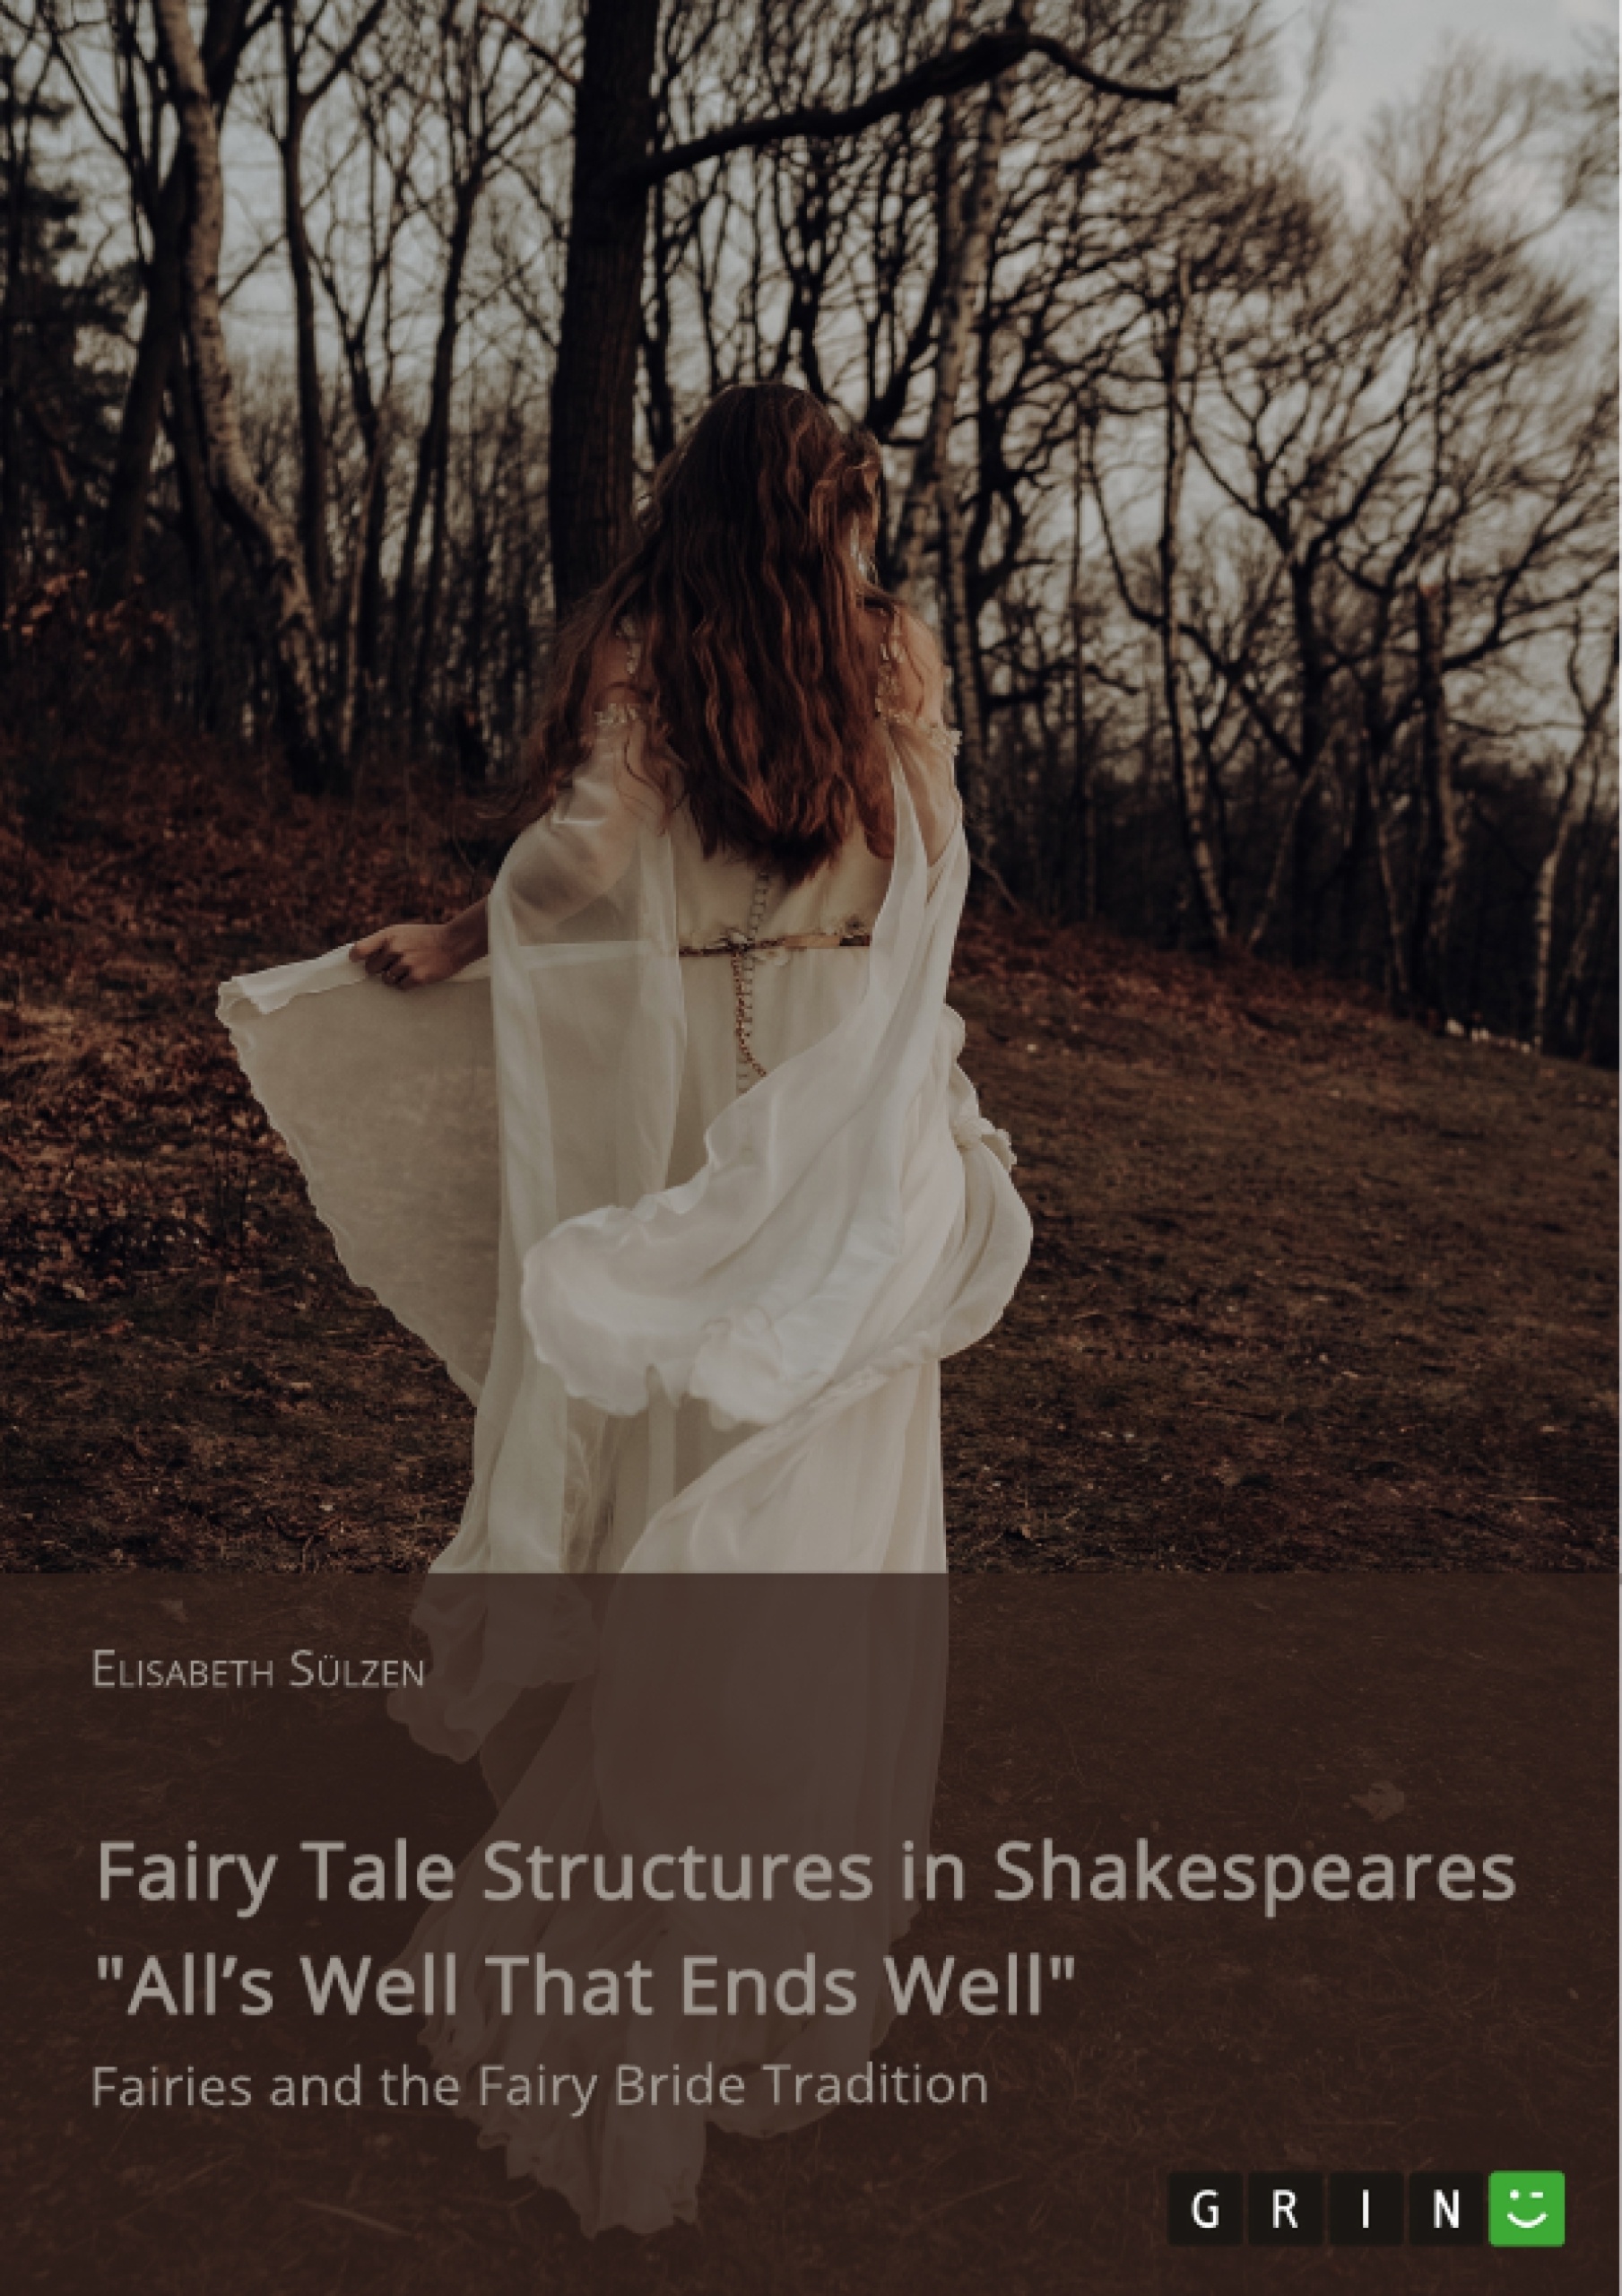 Title: Fairy Tale Structures in Shakespeares "All’s Well That Ends Well". Fairies and the Fairy Bride Tradition